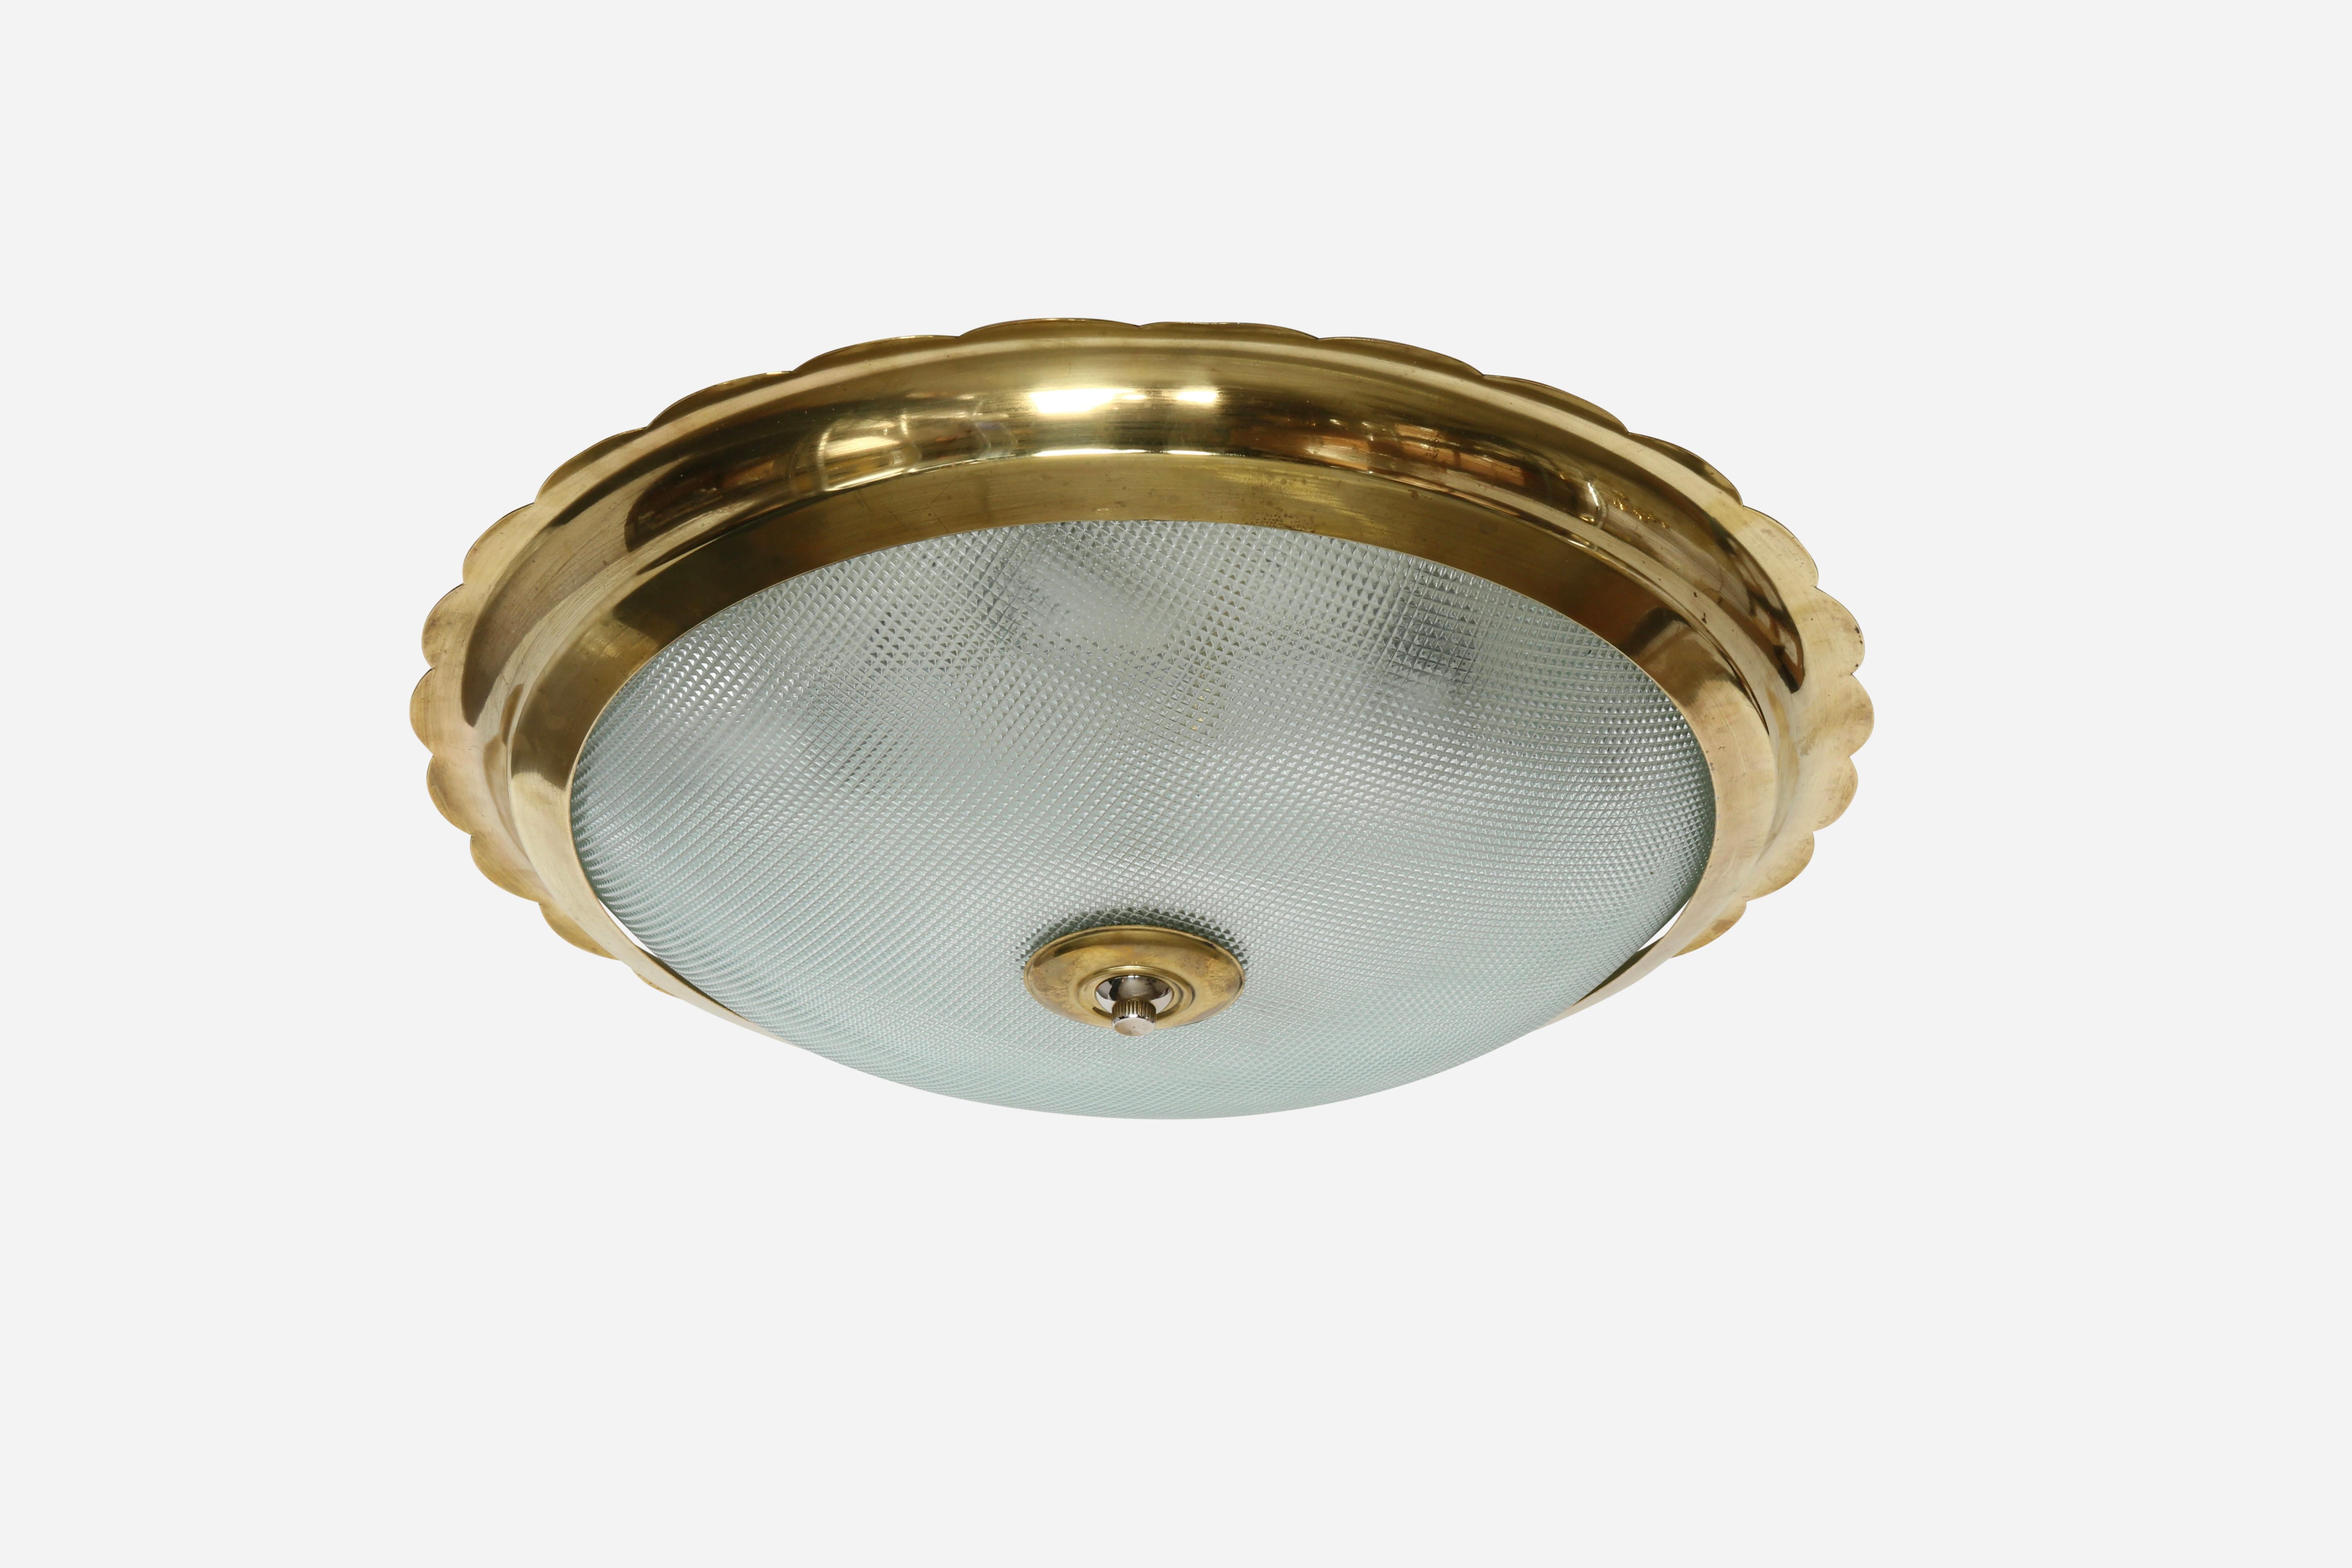 Italian flush mount ceiling light, large
Designed and made in Italy in 1960s.
Textured glass, scalloped brass frame.
Takes 7 candelabra bulbs.
Complimentary US rewiring upon request.